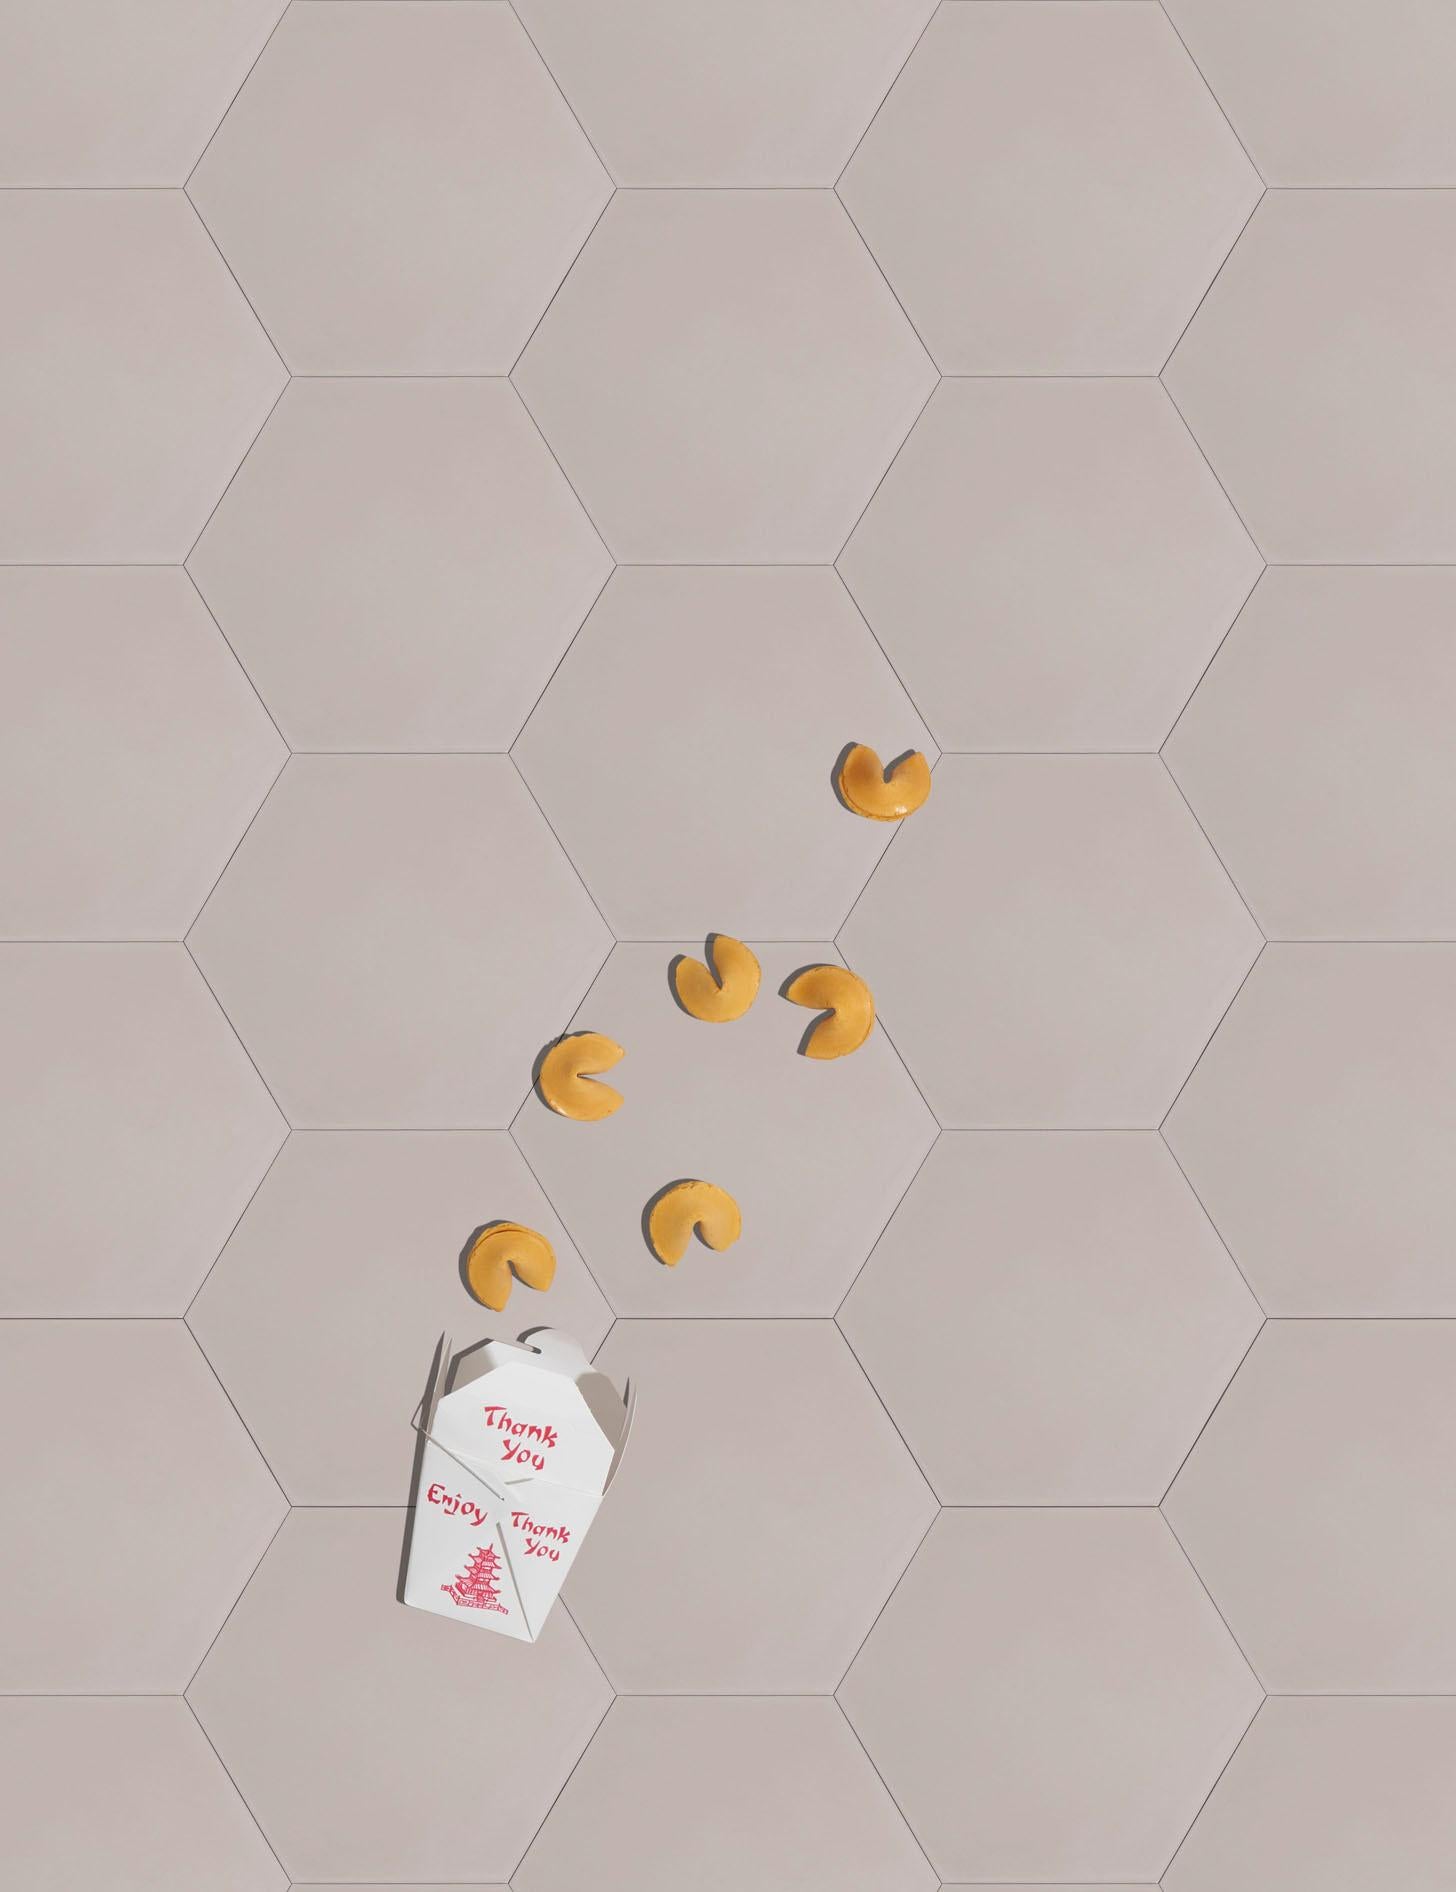 Available in our full palette in both cement and ceramic tile, these solid-shade hexagonal tiles can stand alone or mix with other colors to create a multicolor surface. They can also be coordinated with our Moon Phase tiles for a calming mix of